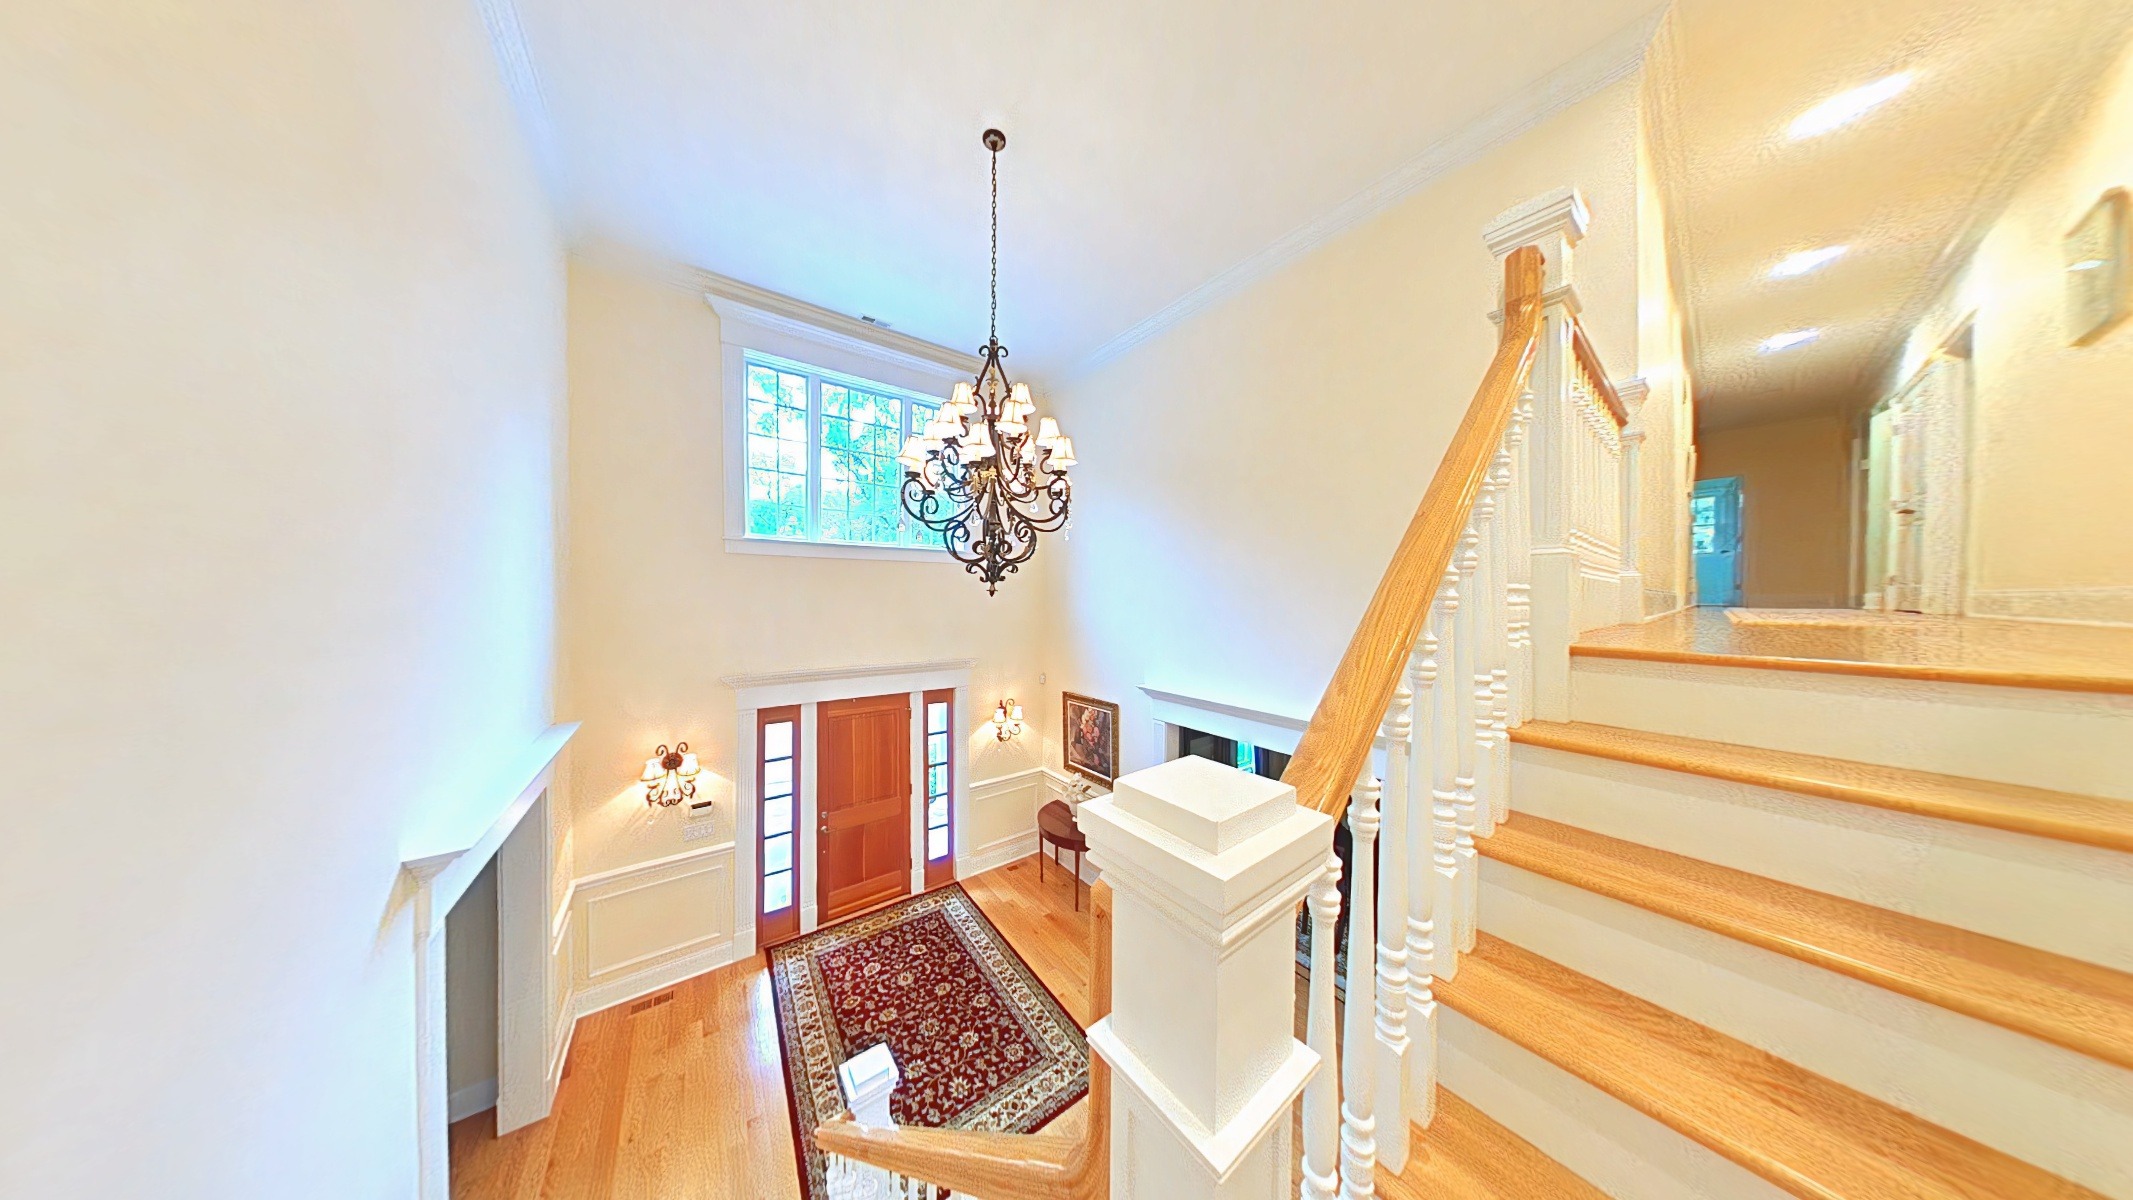 Main staircase to bedrooms and laundry room.  Remote chandelier in foyer (for easy cleaning).